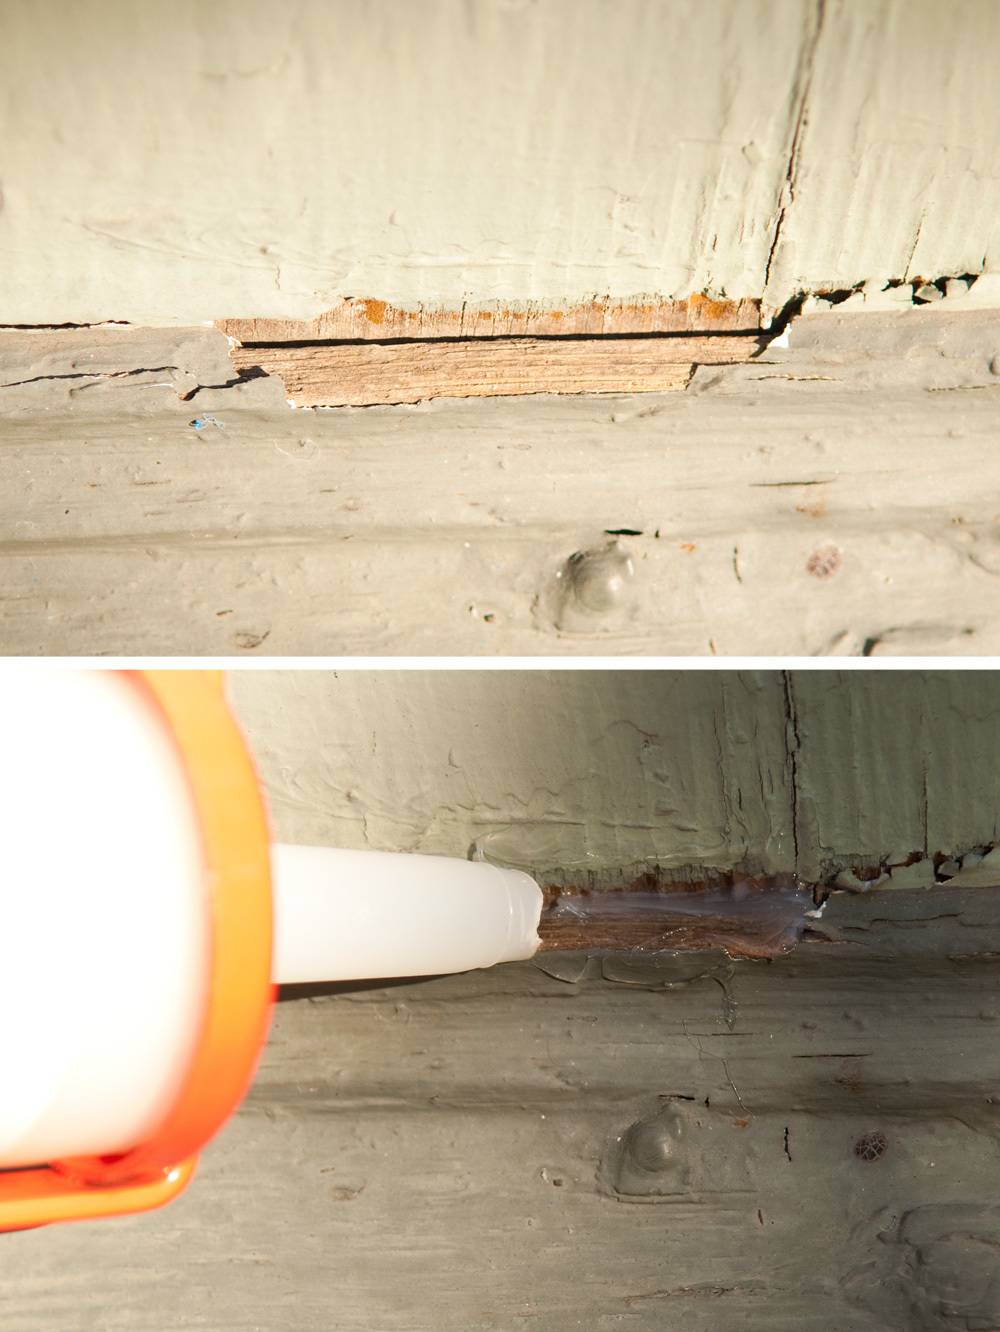 Small glue gun patching up a cracked section of a porch which is in seriously bad shape.